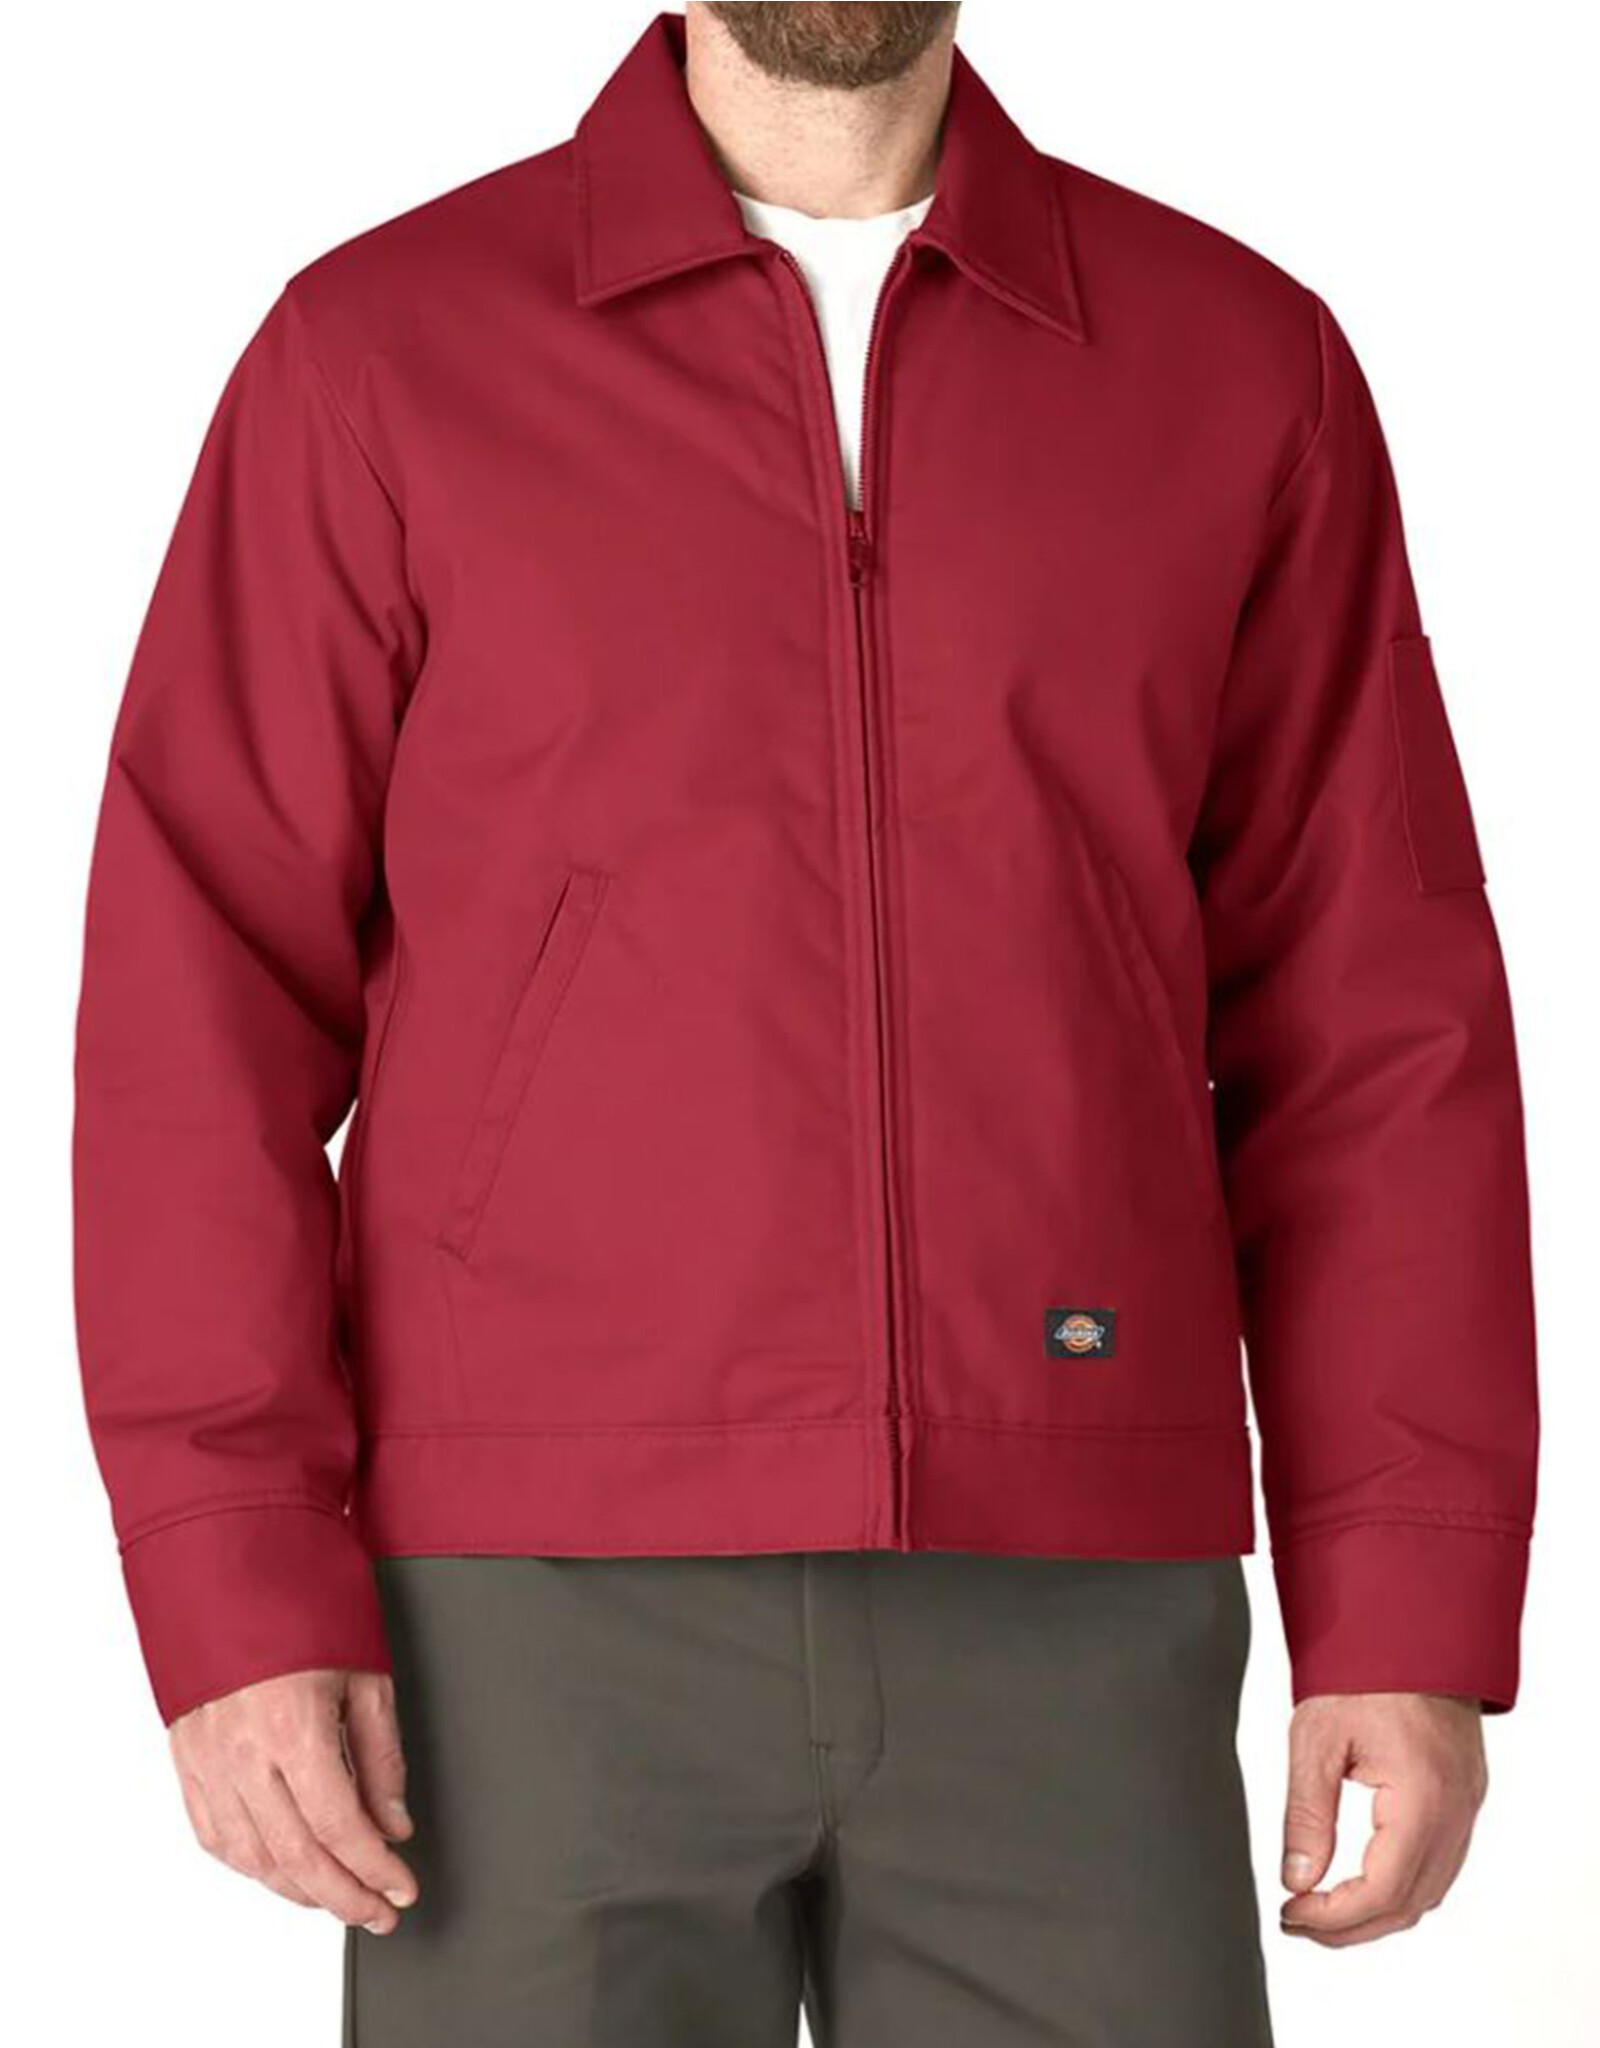 DICKIES Insulated Eisenhower Jacket English Red - TJ15ER